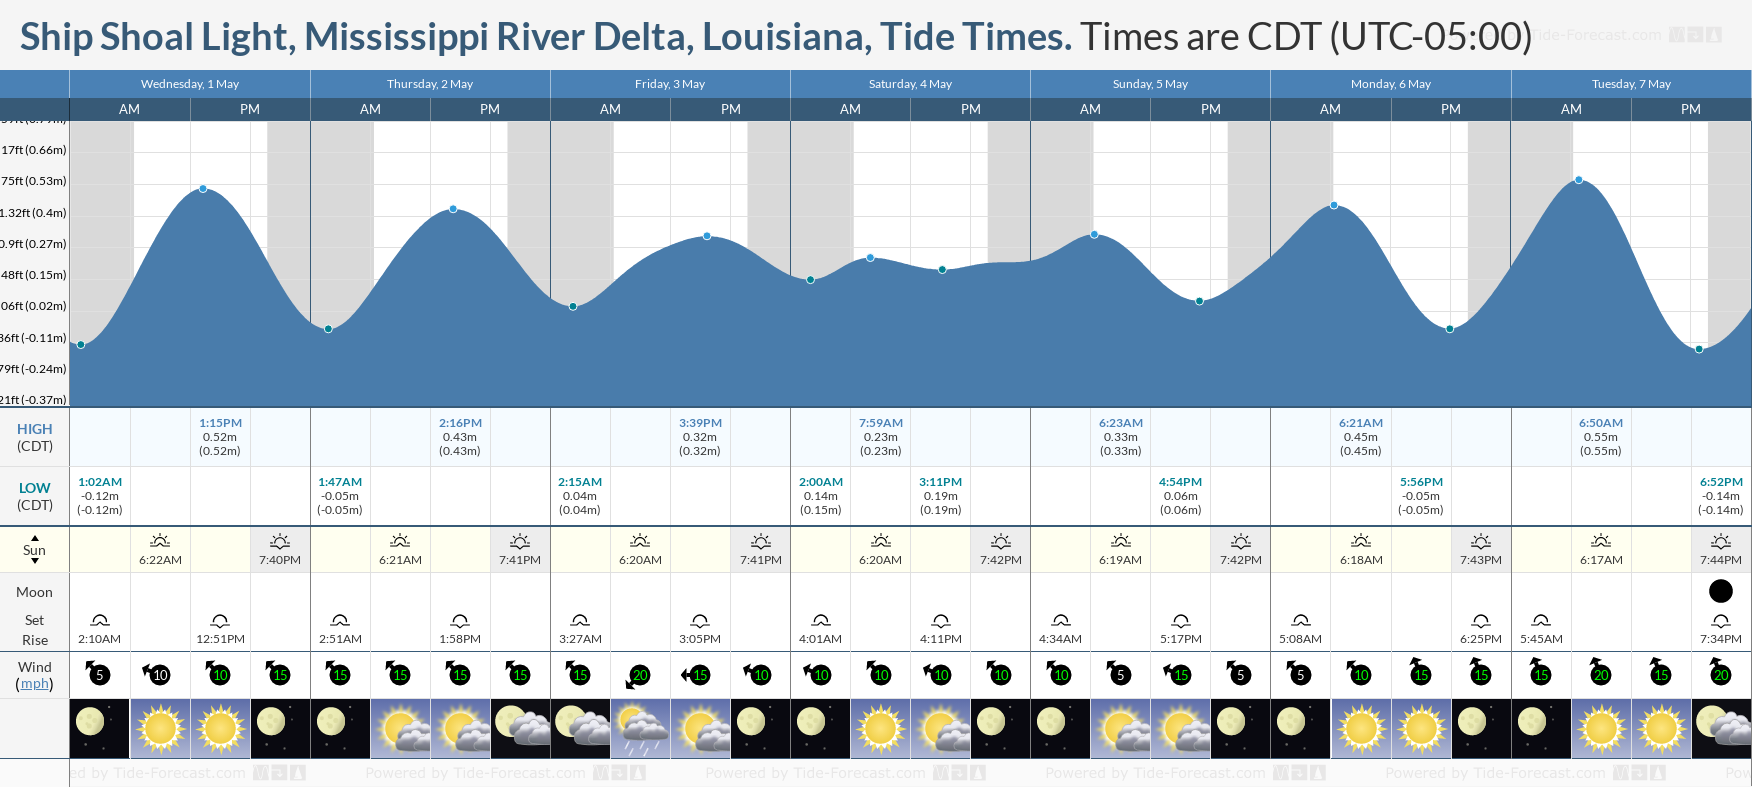 Ship Shoal Light, Mississippi River Delta, Louisiana Tide Chart including high and low tide tide times for the next 7 days